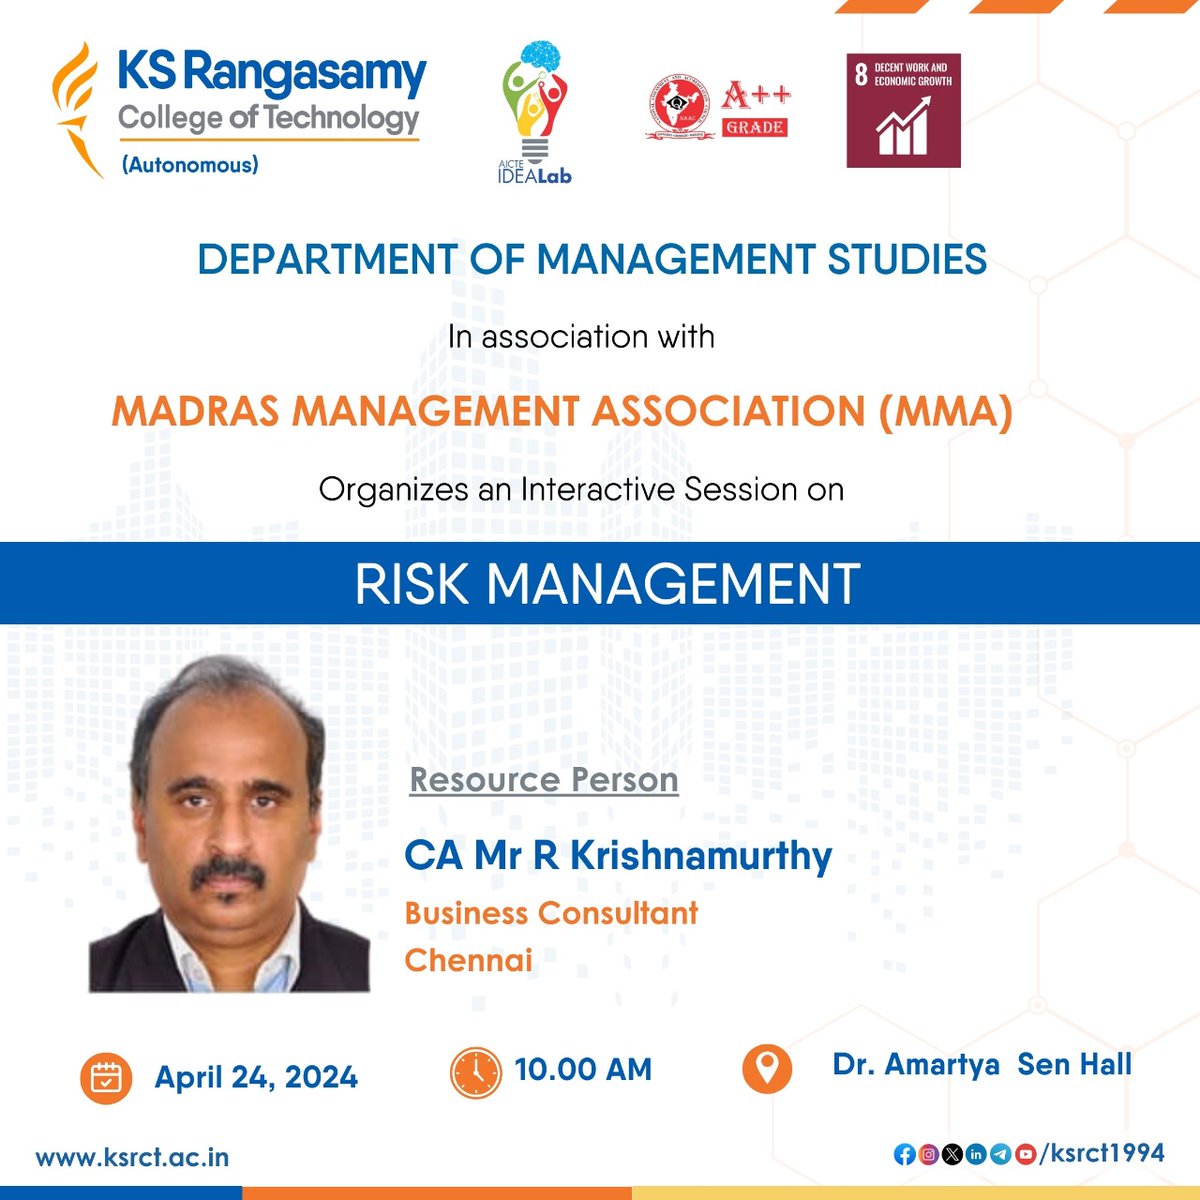 Department of Management Studies #ksrct1994 in association with Madras Management Association organizes an interactive session on Risk Management on 24.04.2024 by 10 am @ Dr. Amartya Sen Hall. 
Resource person:
CA Mr. R. Krishnamurthy
Business Consultant
Chennai